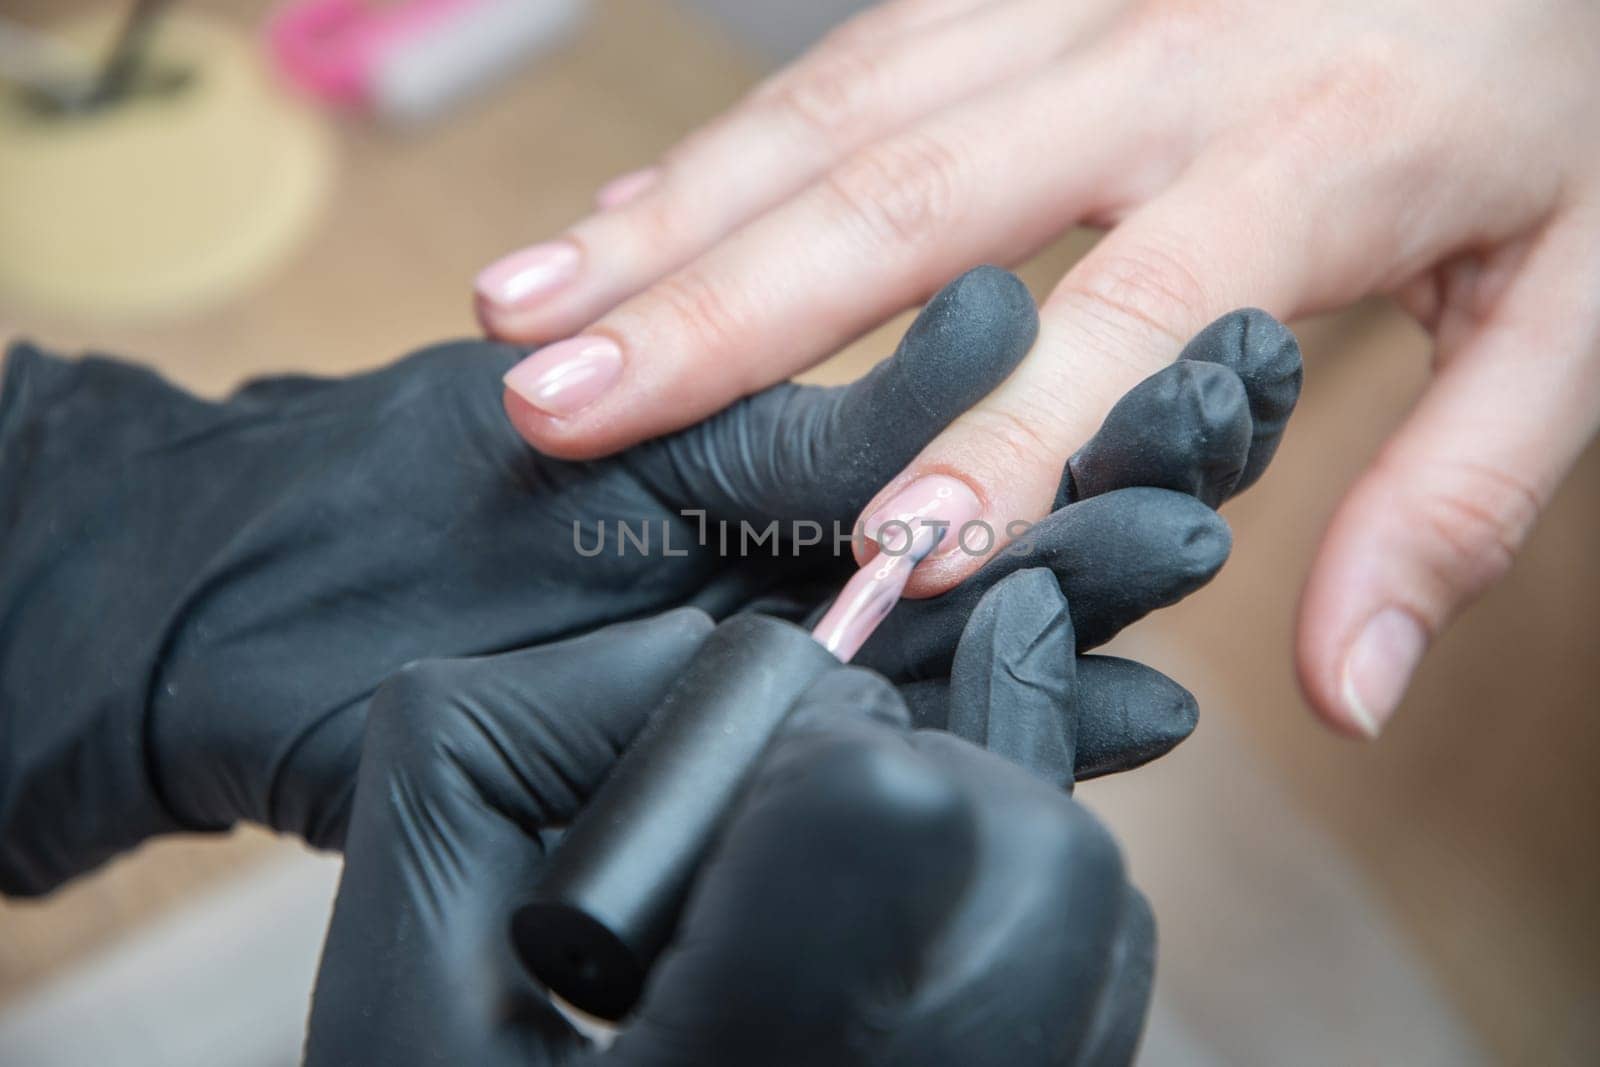 a master does a manicure to a client in a beauty salon and covers her nails with pink varnish. High quality photo